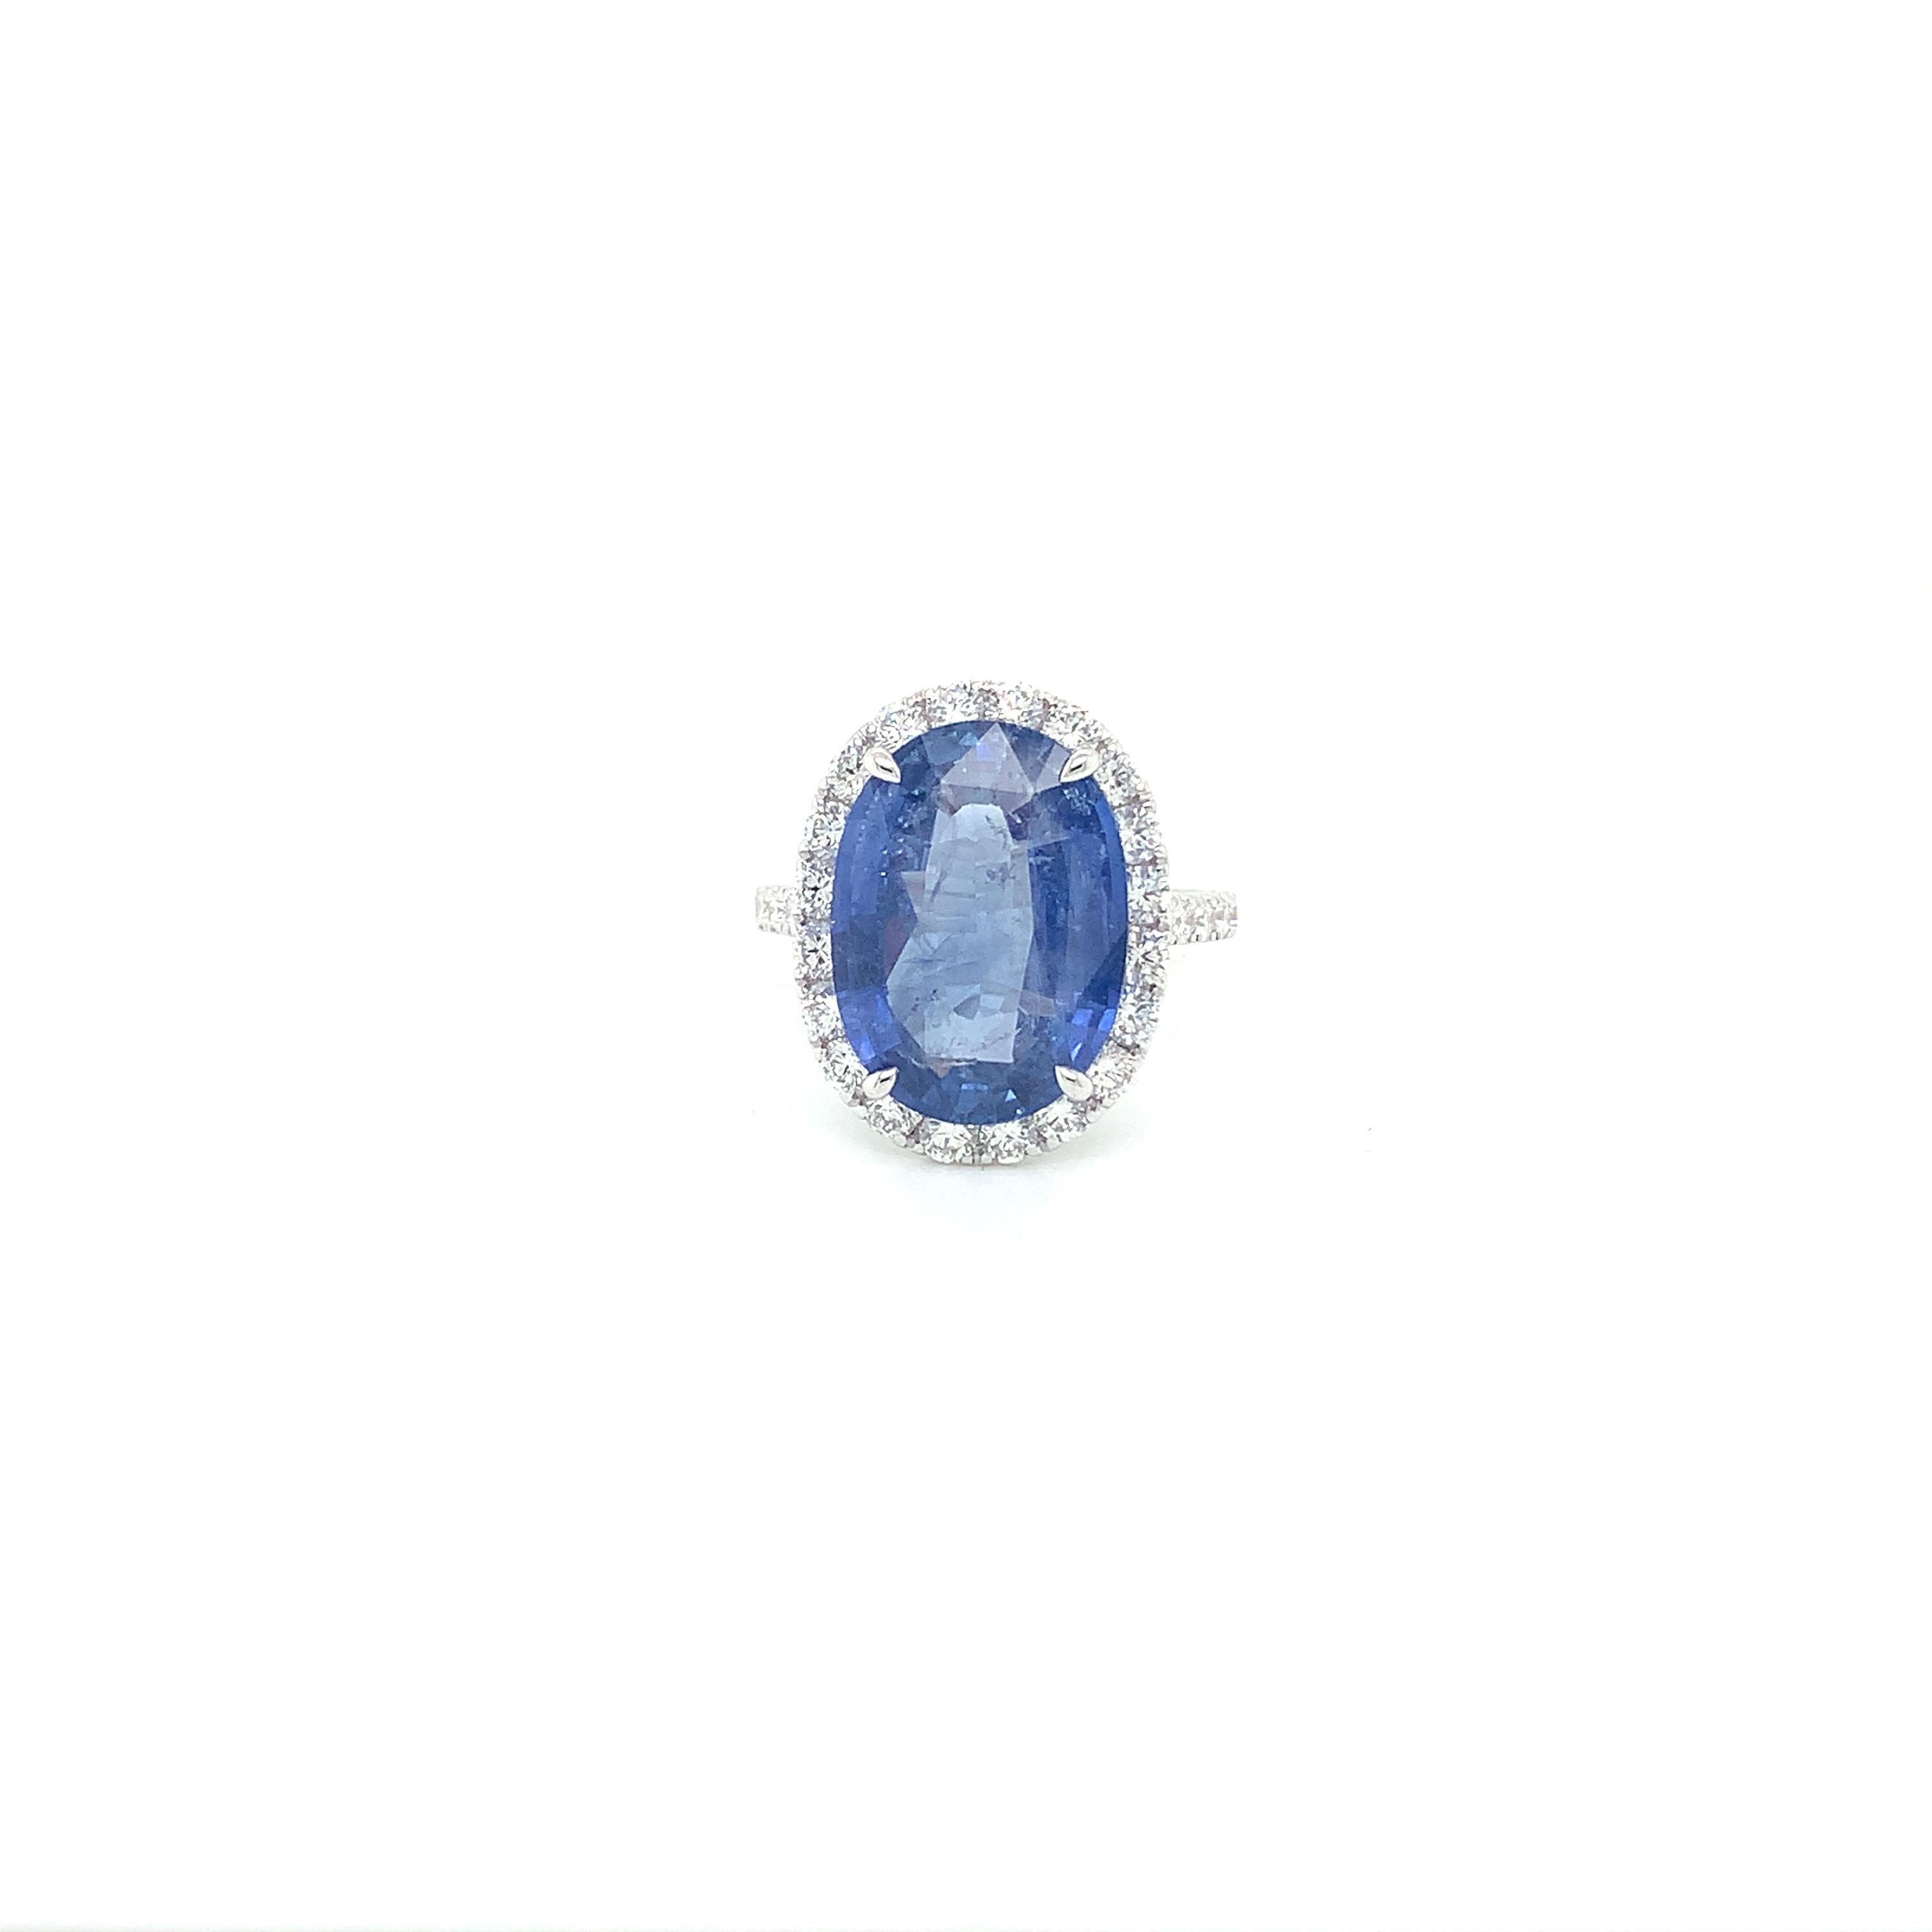 Oval Ceylon Sapphire weighing 9.10 cts
Measuring (14.2x10.3) mm 
32 pieces of round diamonds weighing 1.17 cts 
Set in 18k white gold ring 
5.33 grams